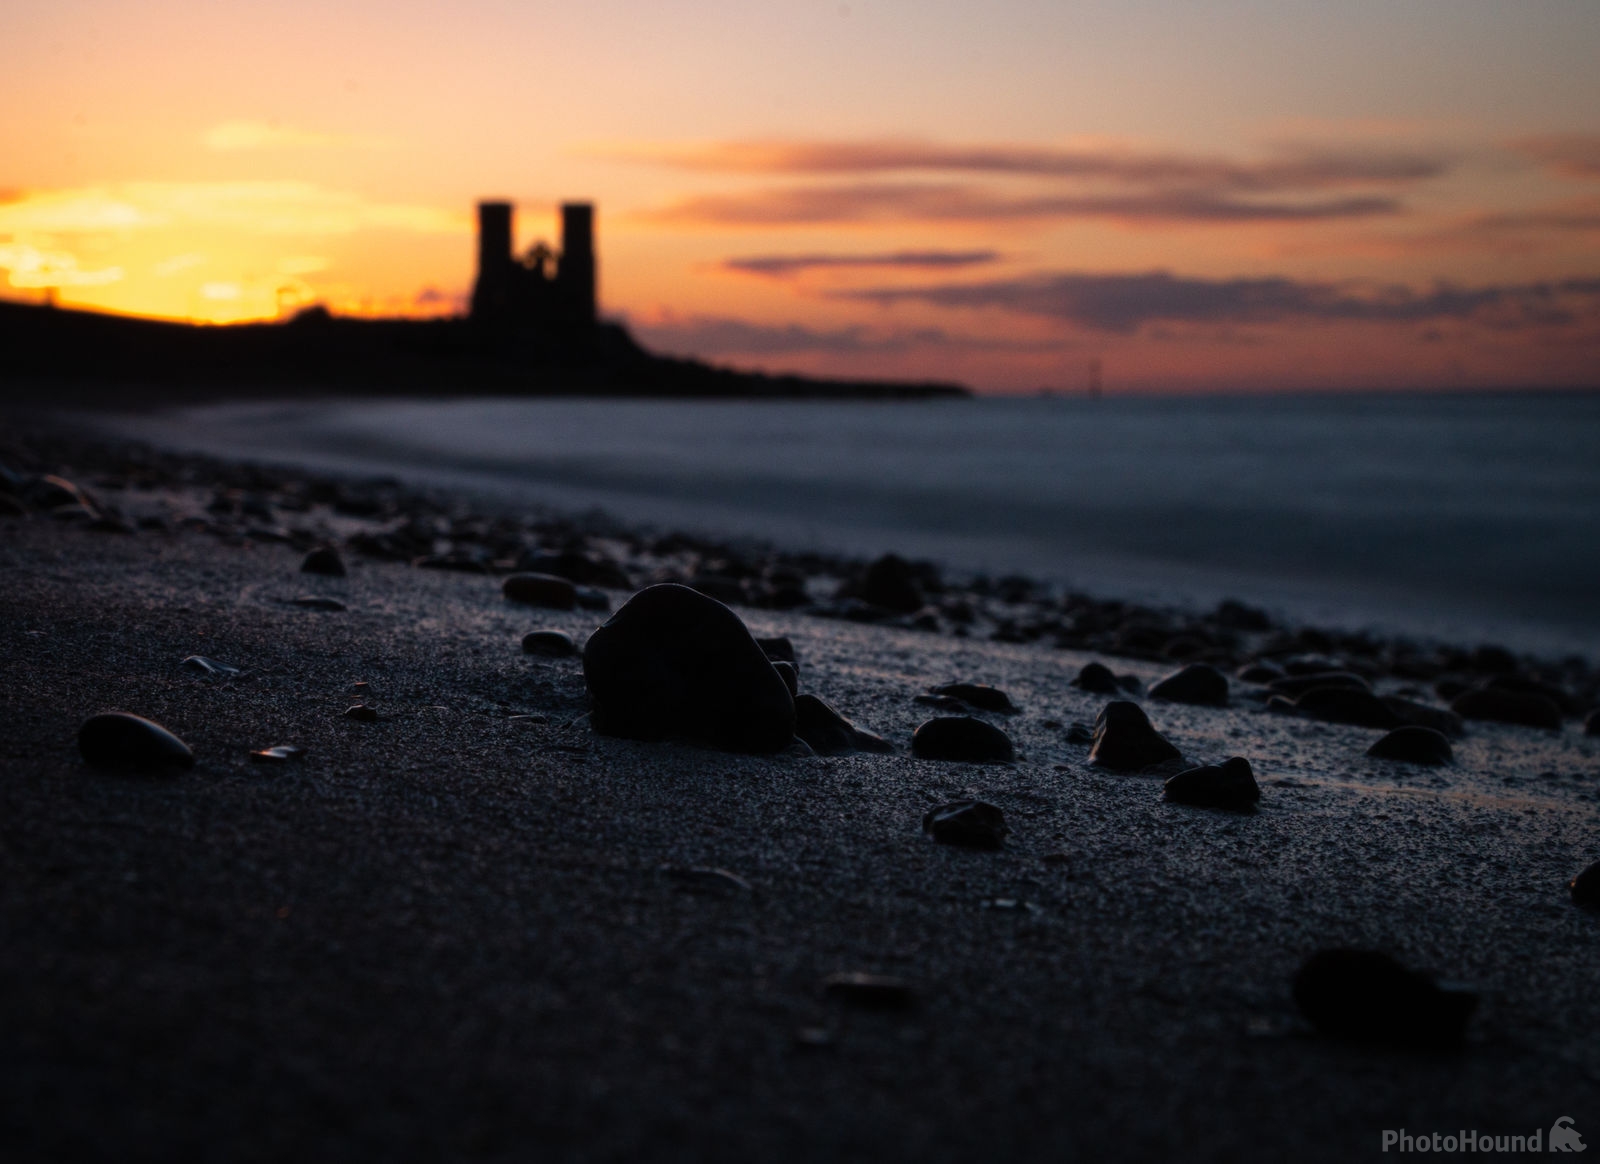 Image of Reculver Towers by James Stevens